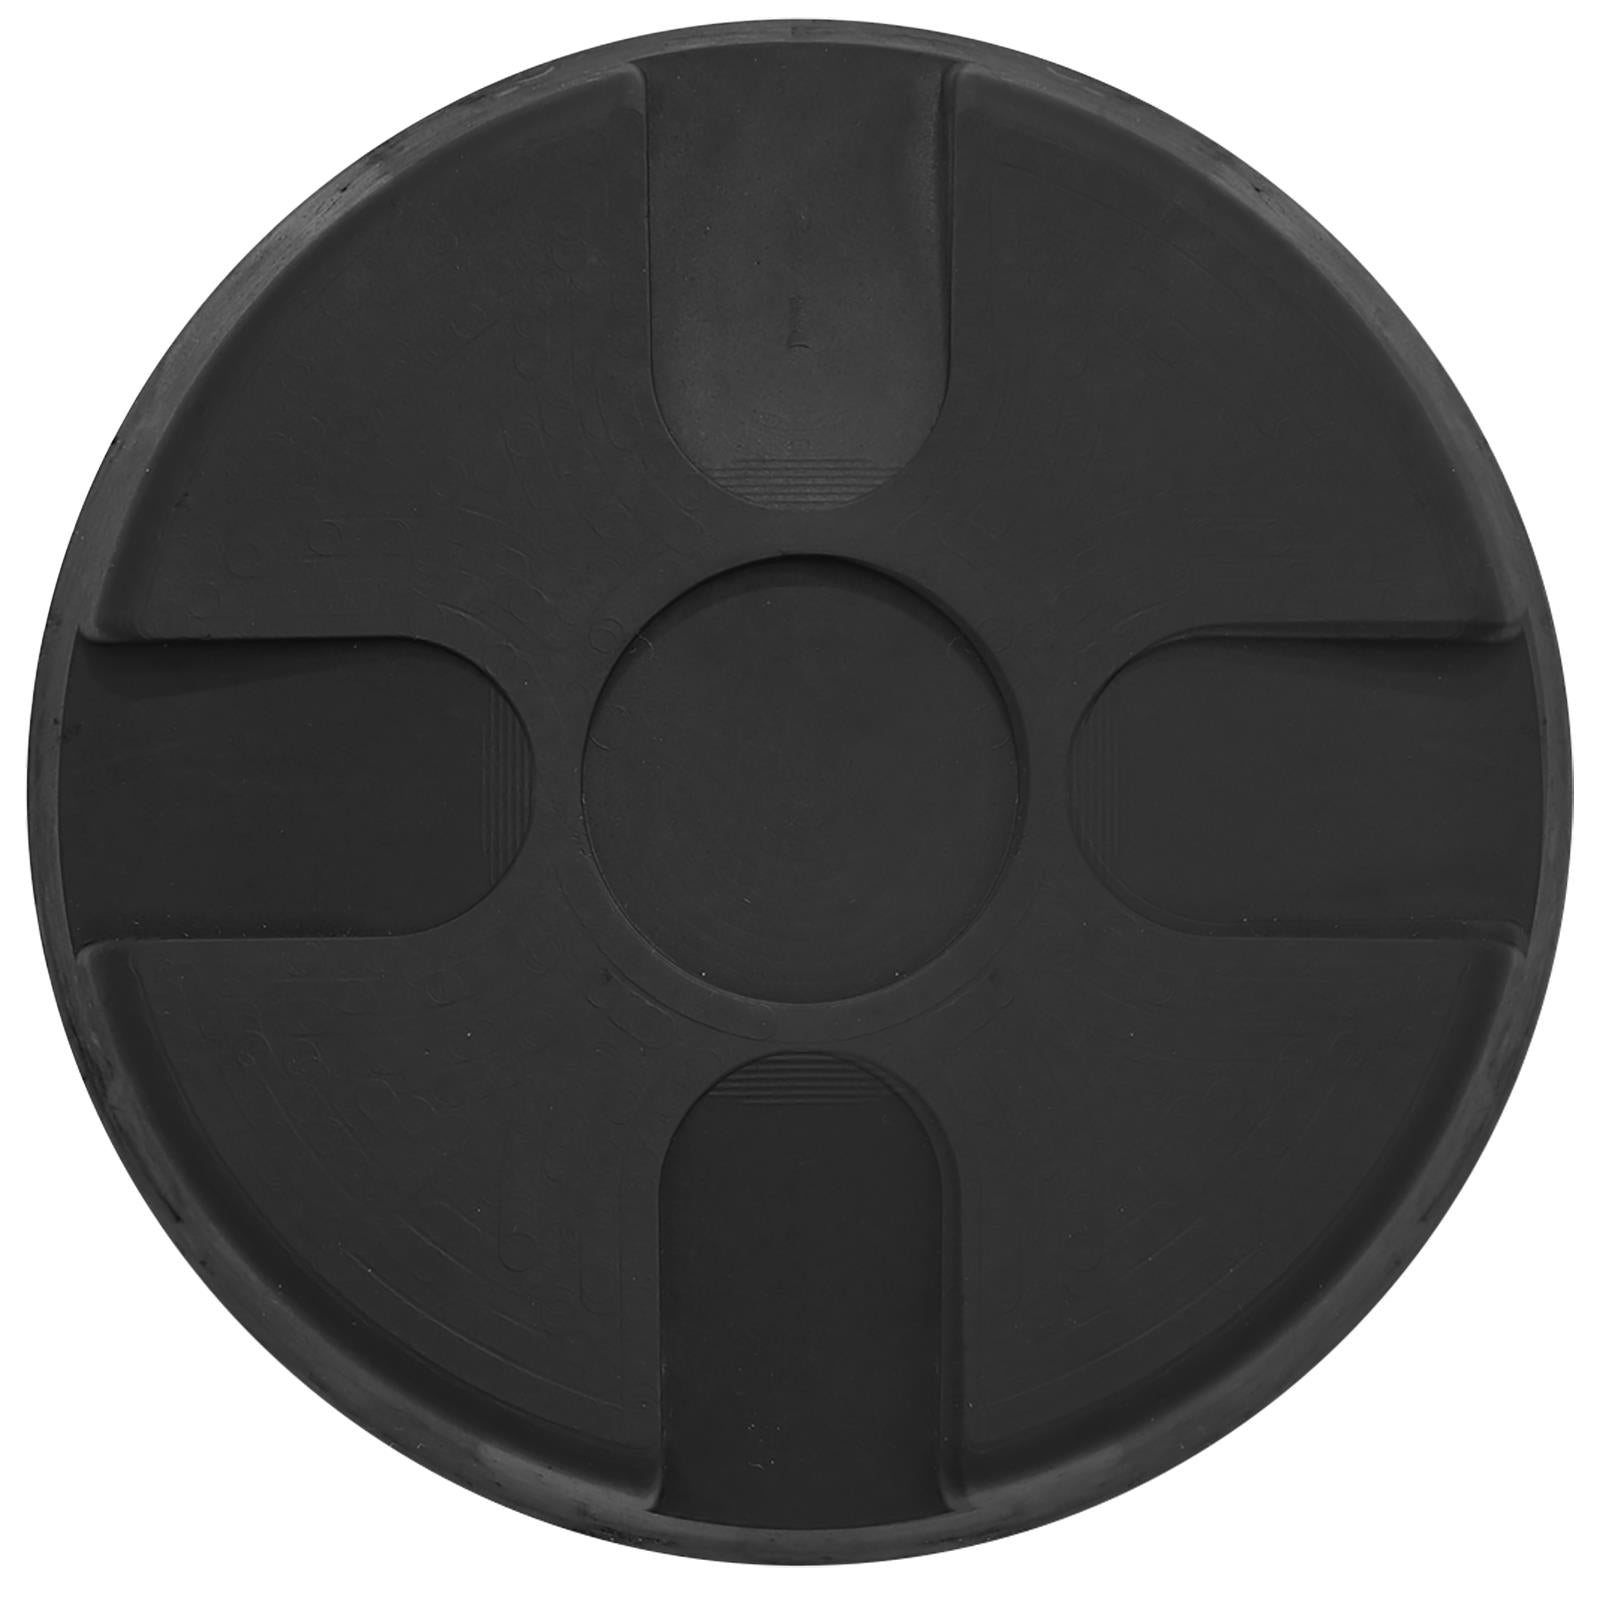 Sealey Safety Rubber Trolley Jack Pad Type B To Fit 112-117mm Saddle